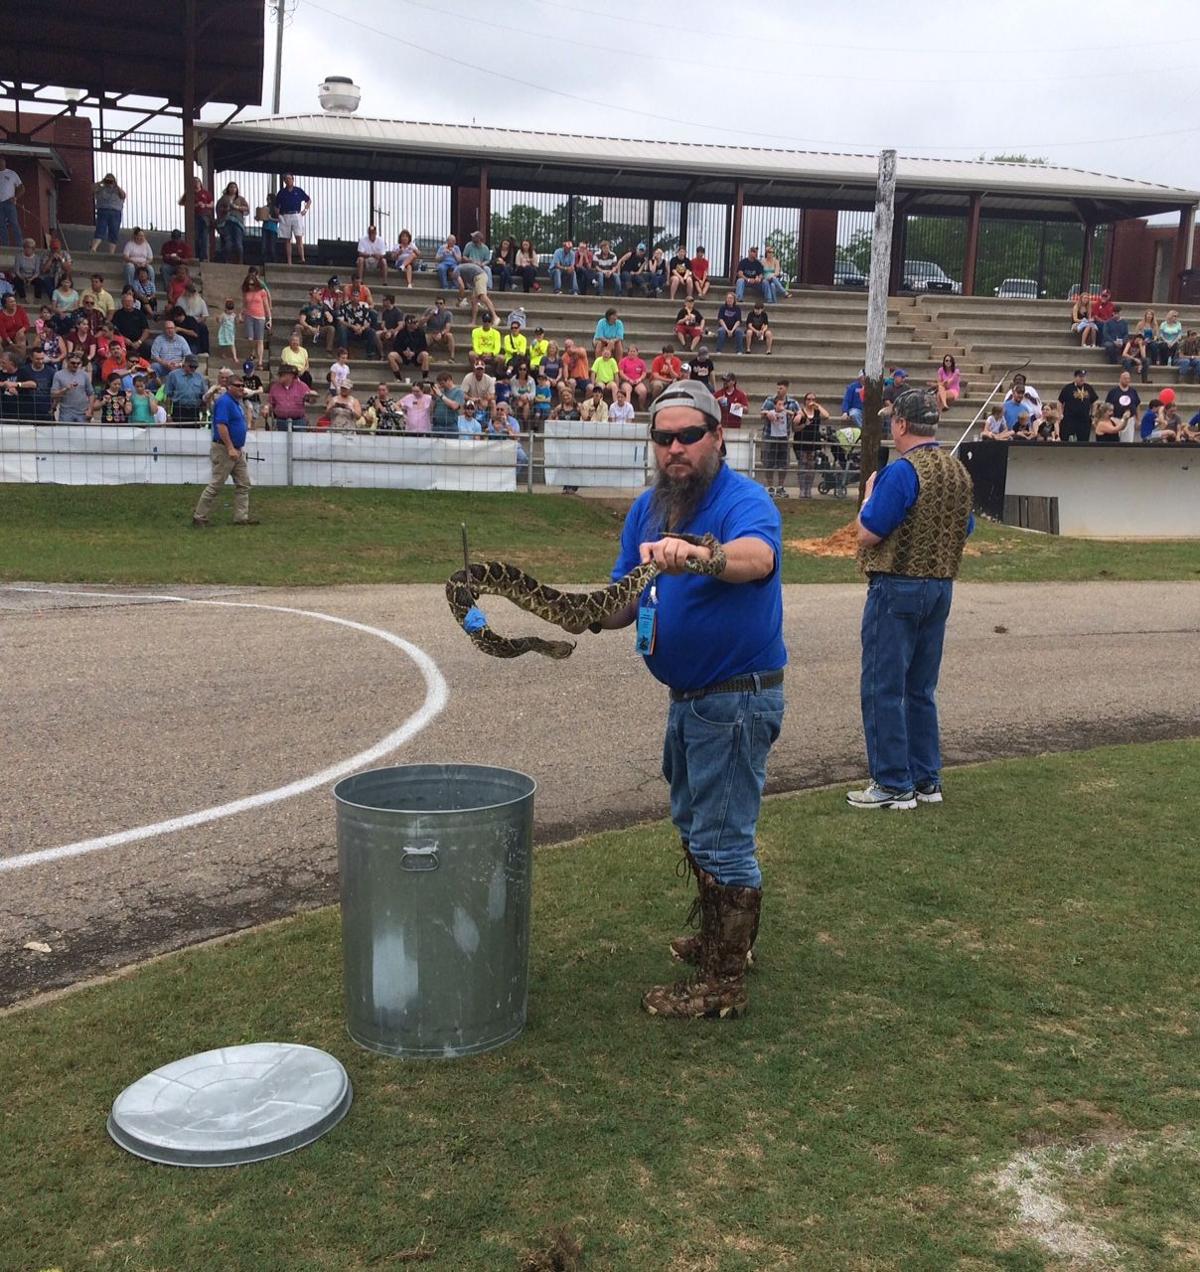 Crowds turn out for Opp Rattlesnake Rodeo Local News